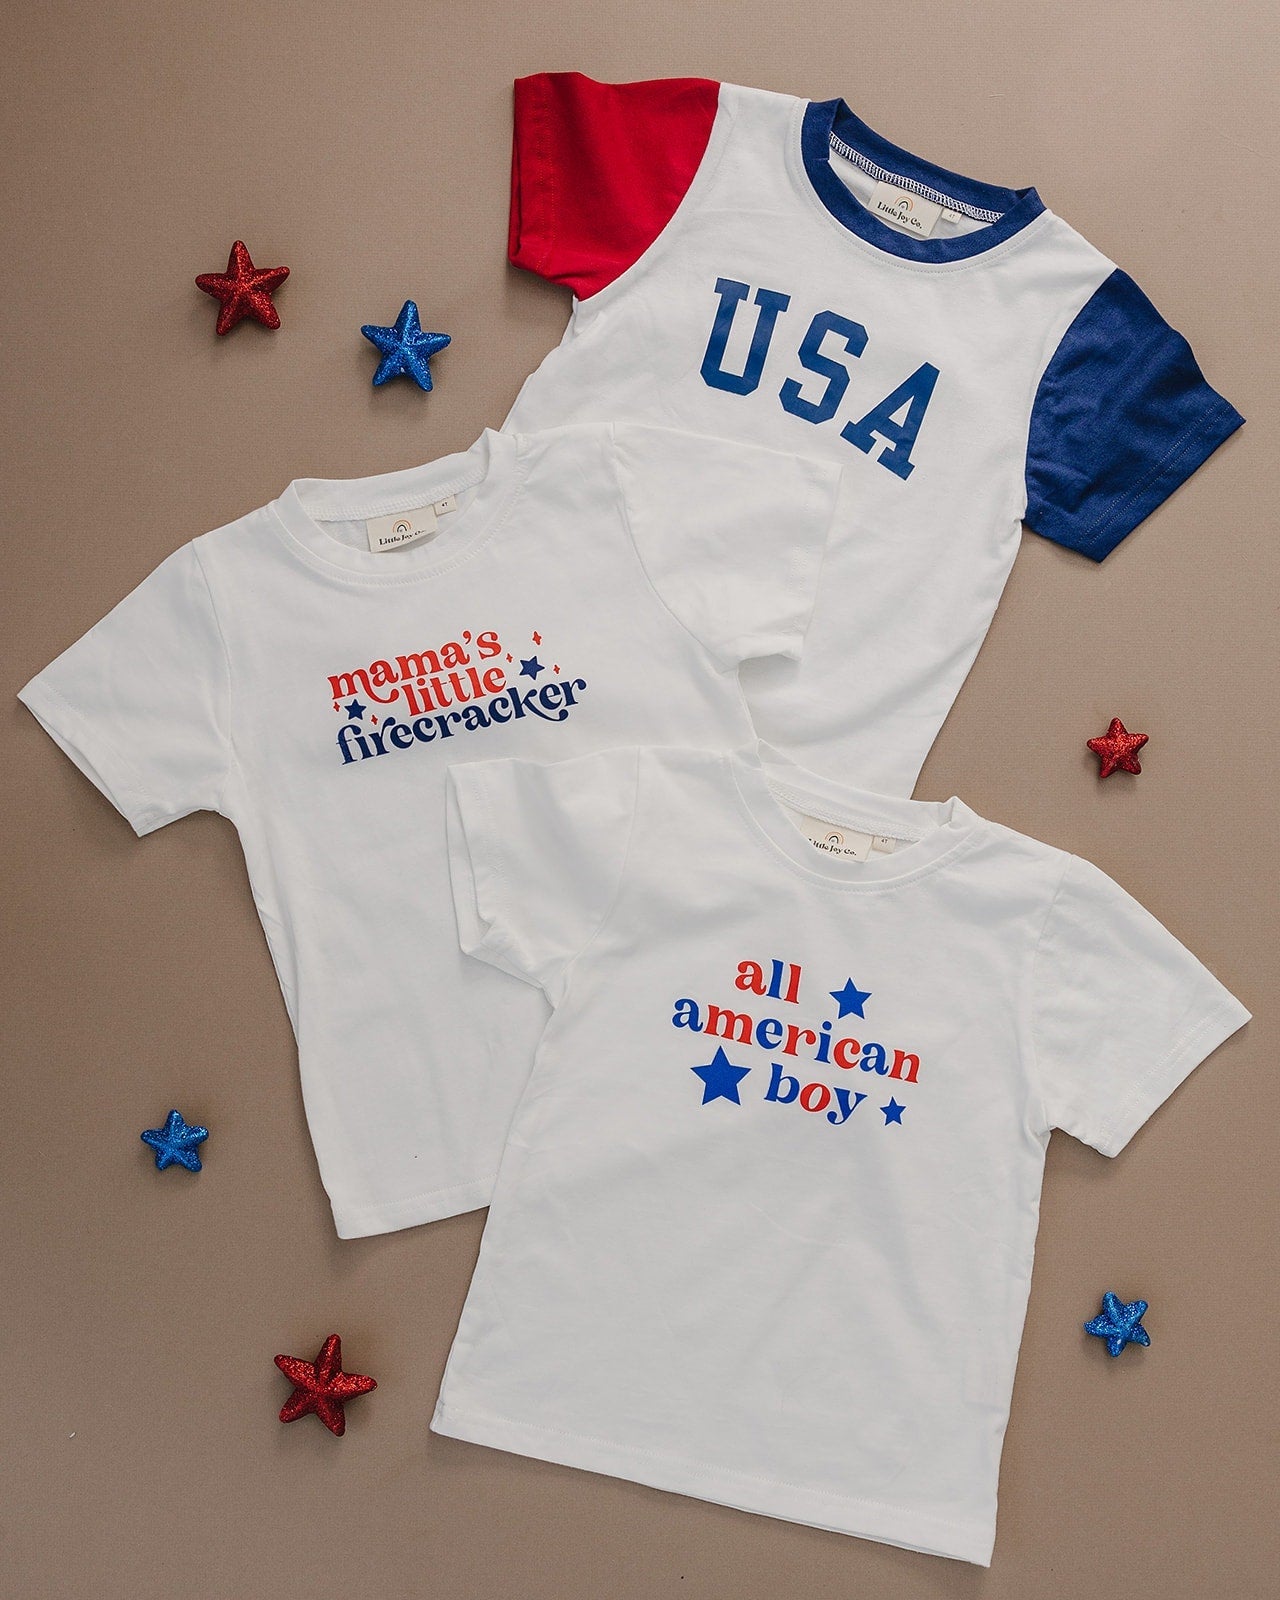 All American Boy T-Shirt - 4th of July Toddler Shirt - 4th of July Outfit - Red, White & Blue Patriotic Shirt - Toddler 4th of July - USA